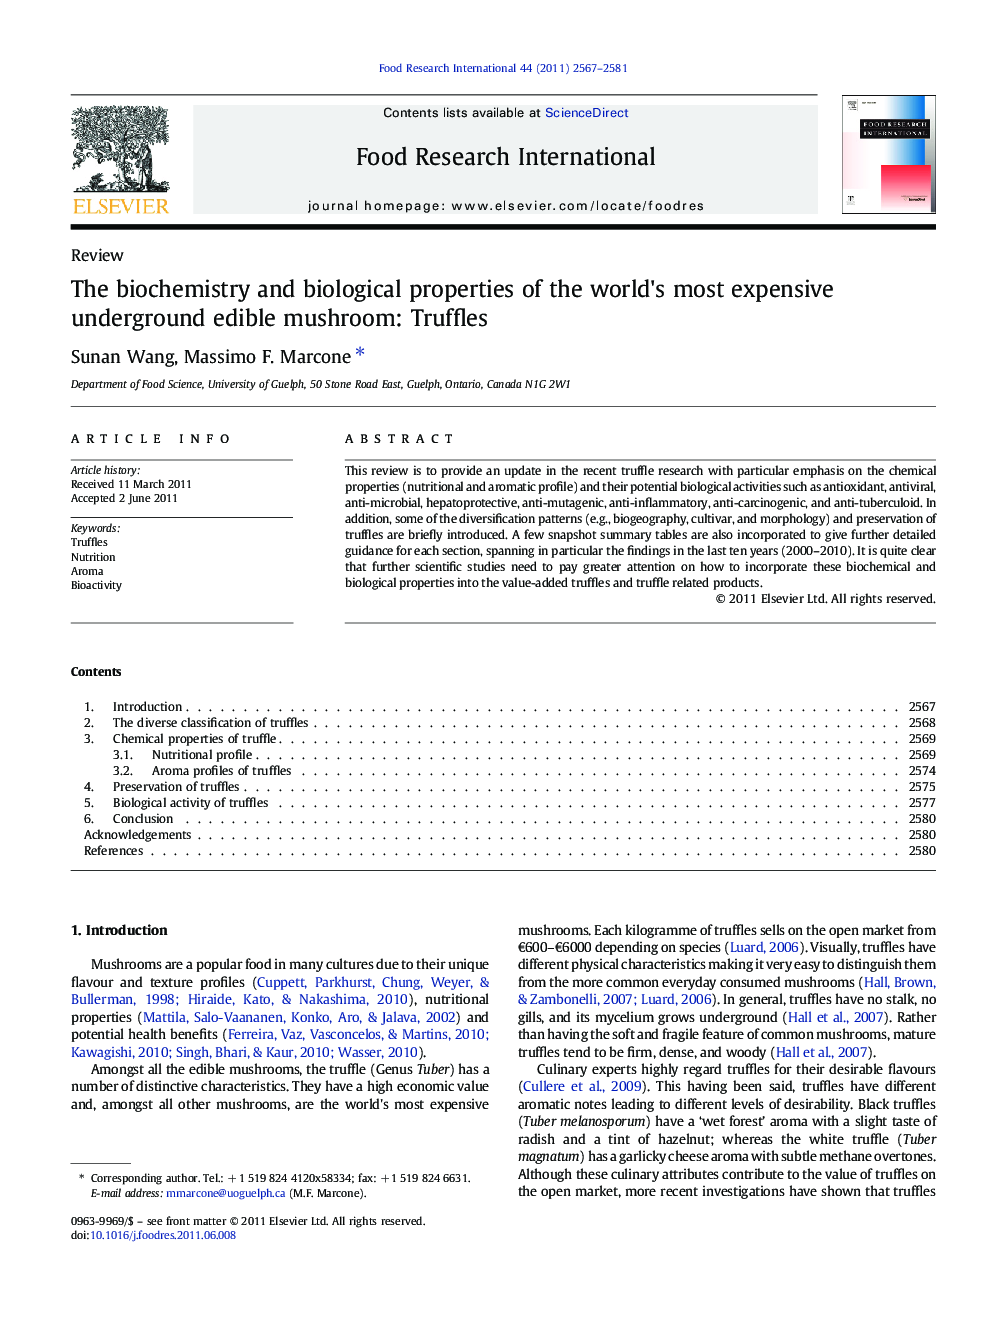 The biochemistry and biological properties of the world's most expensive underground edible mushroom: Truffles